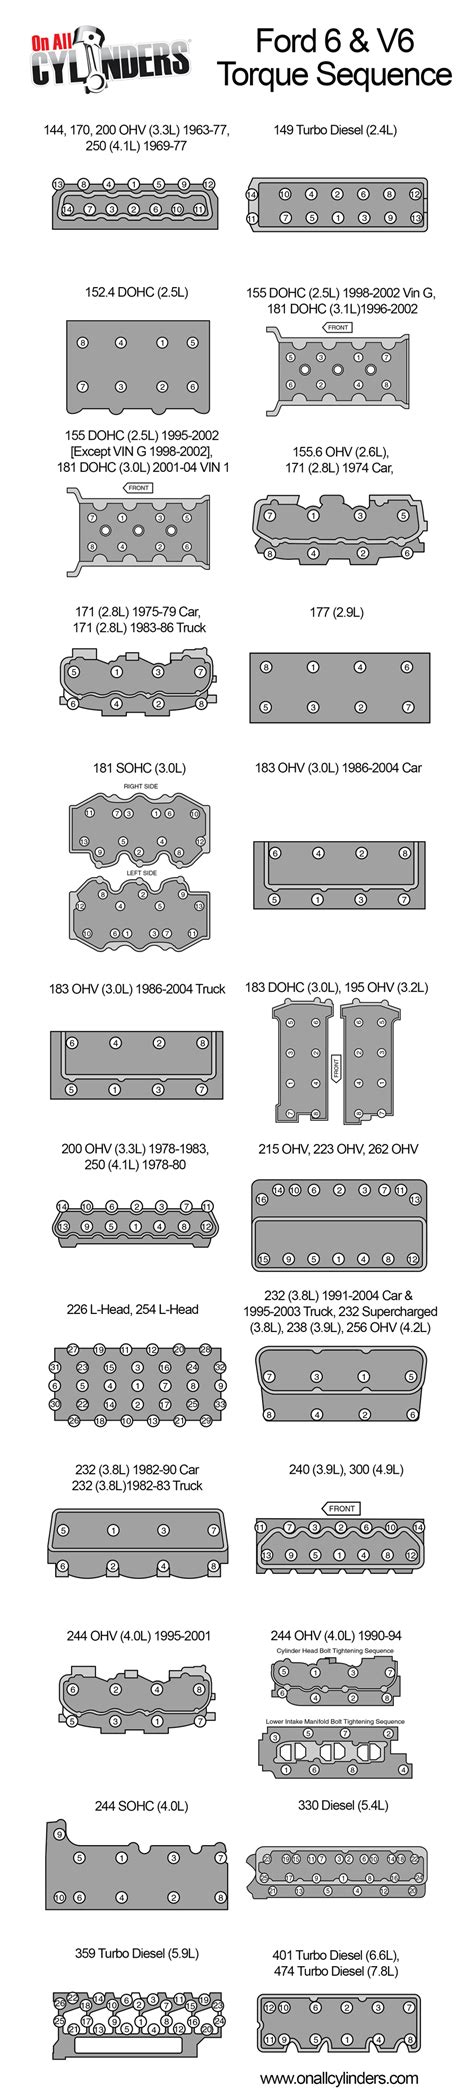 Infographic Cylinder Head Torque Sequences For Ford 6 And V6 Engines